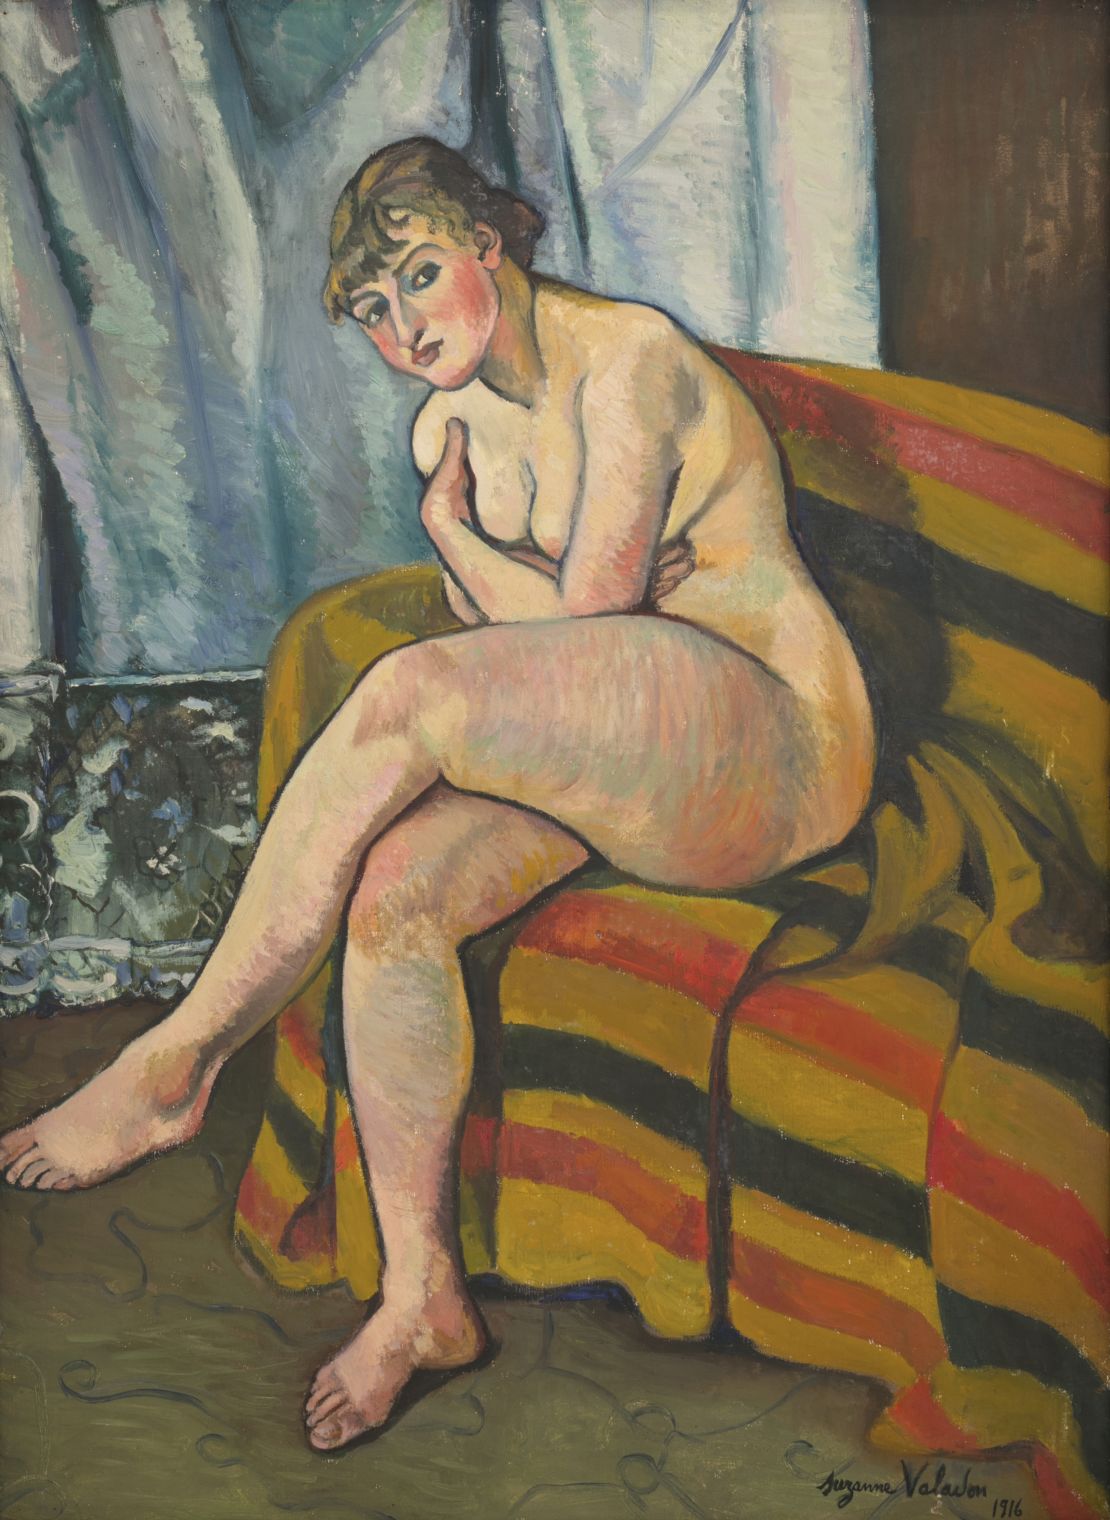 Valadon will receive her first major US show at the Barnes Foundation in Philadelphia this fall, a century after she began receiving critical acclaim for her work. Pictured: "Nude Sitting on a Sofa," 1916.